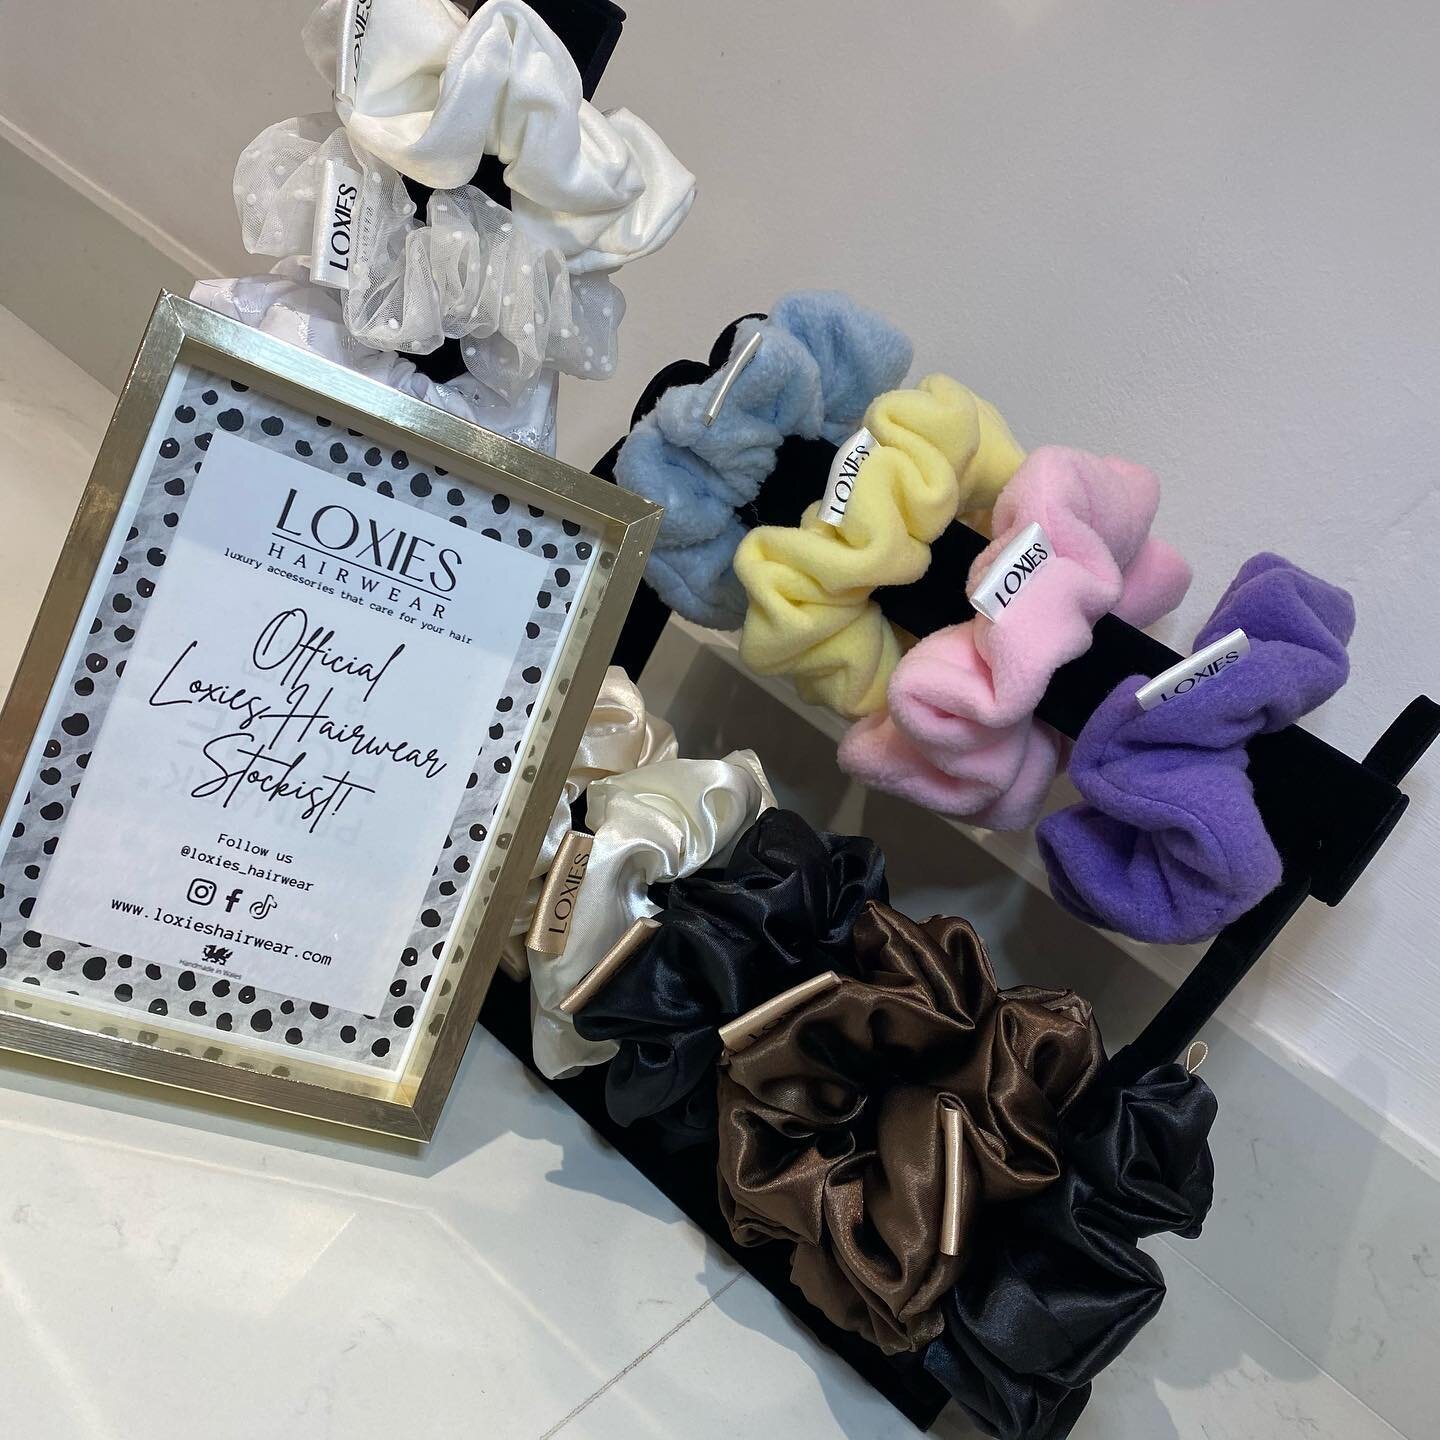 So excited to announce we are now stocking @loxies_hairwear scrunchies &amp; hair accessories in our Caernarfon Salon!💗 Cute &amp; practical accessories all handmade in Wales 🏴󠁧󠁢󠁷󠁬󠁳󠁿 Pop in to get yours!